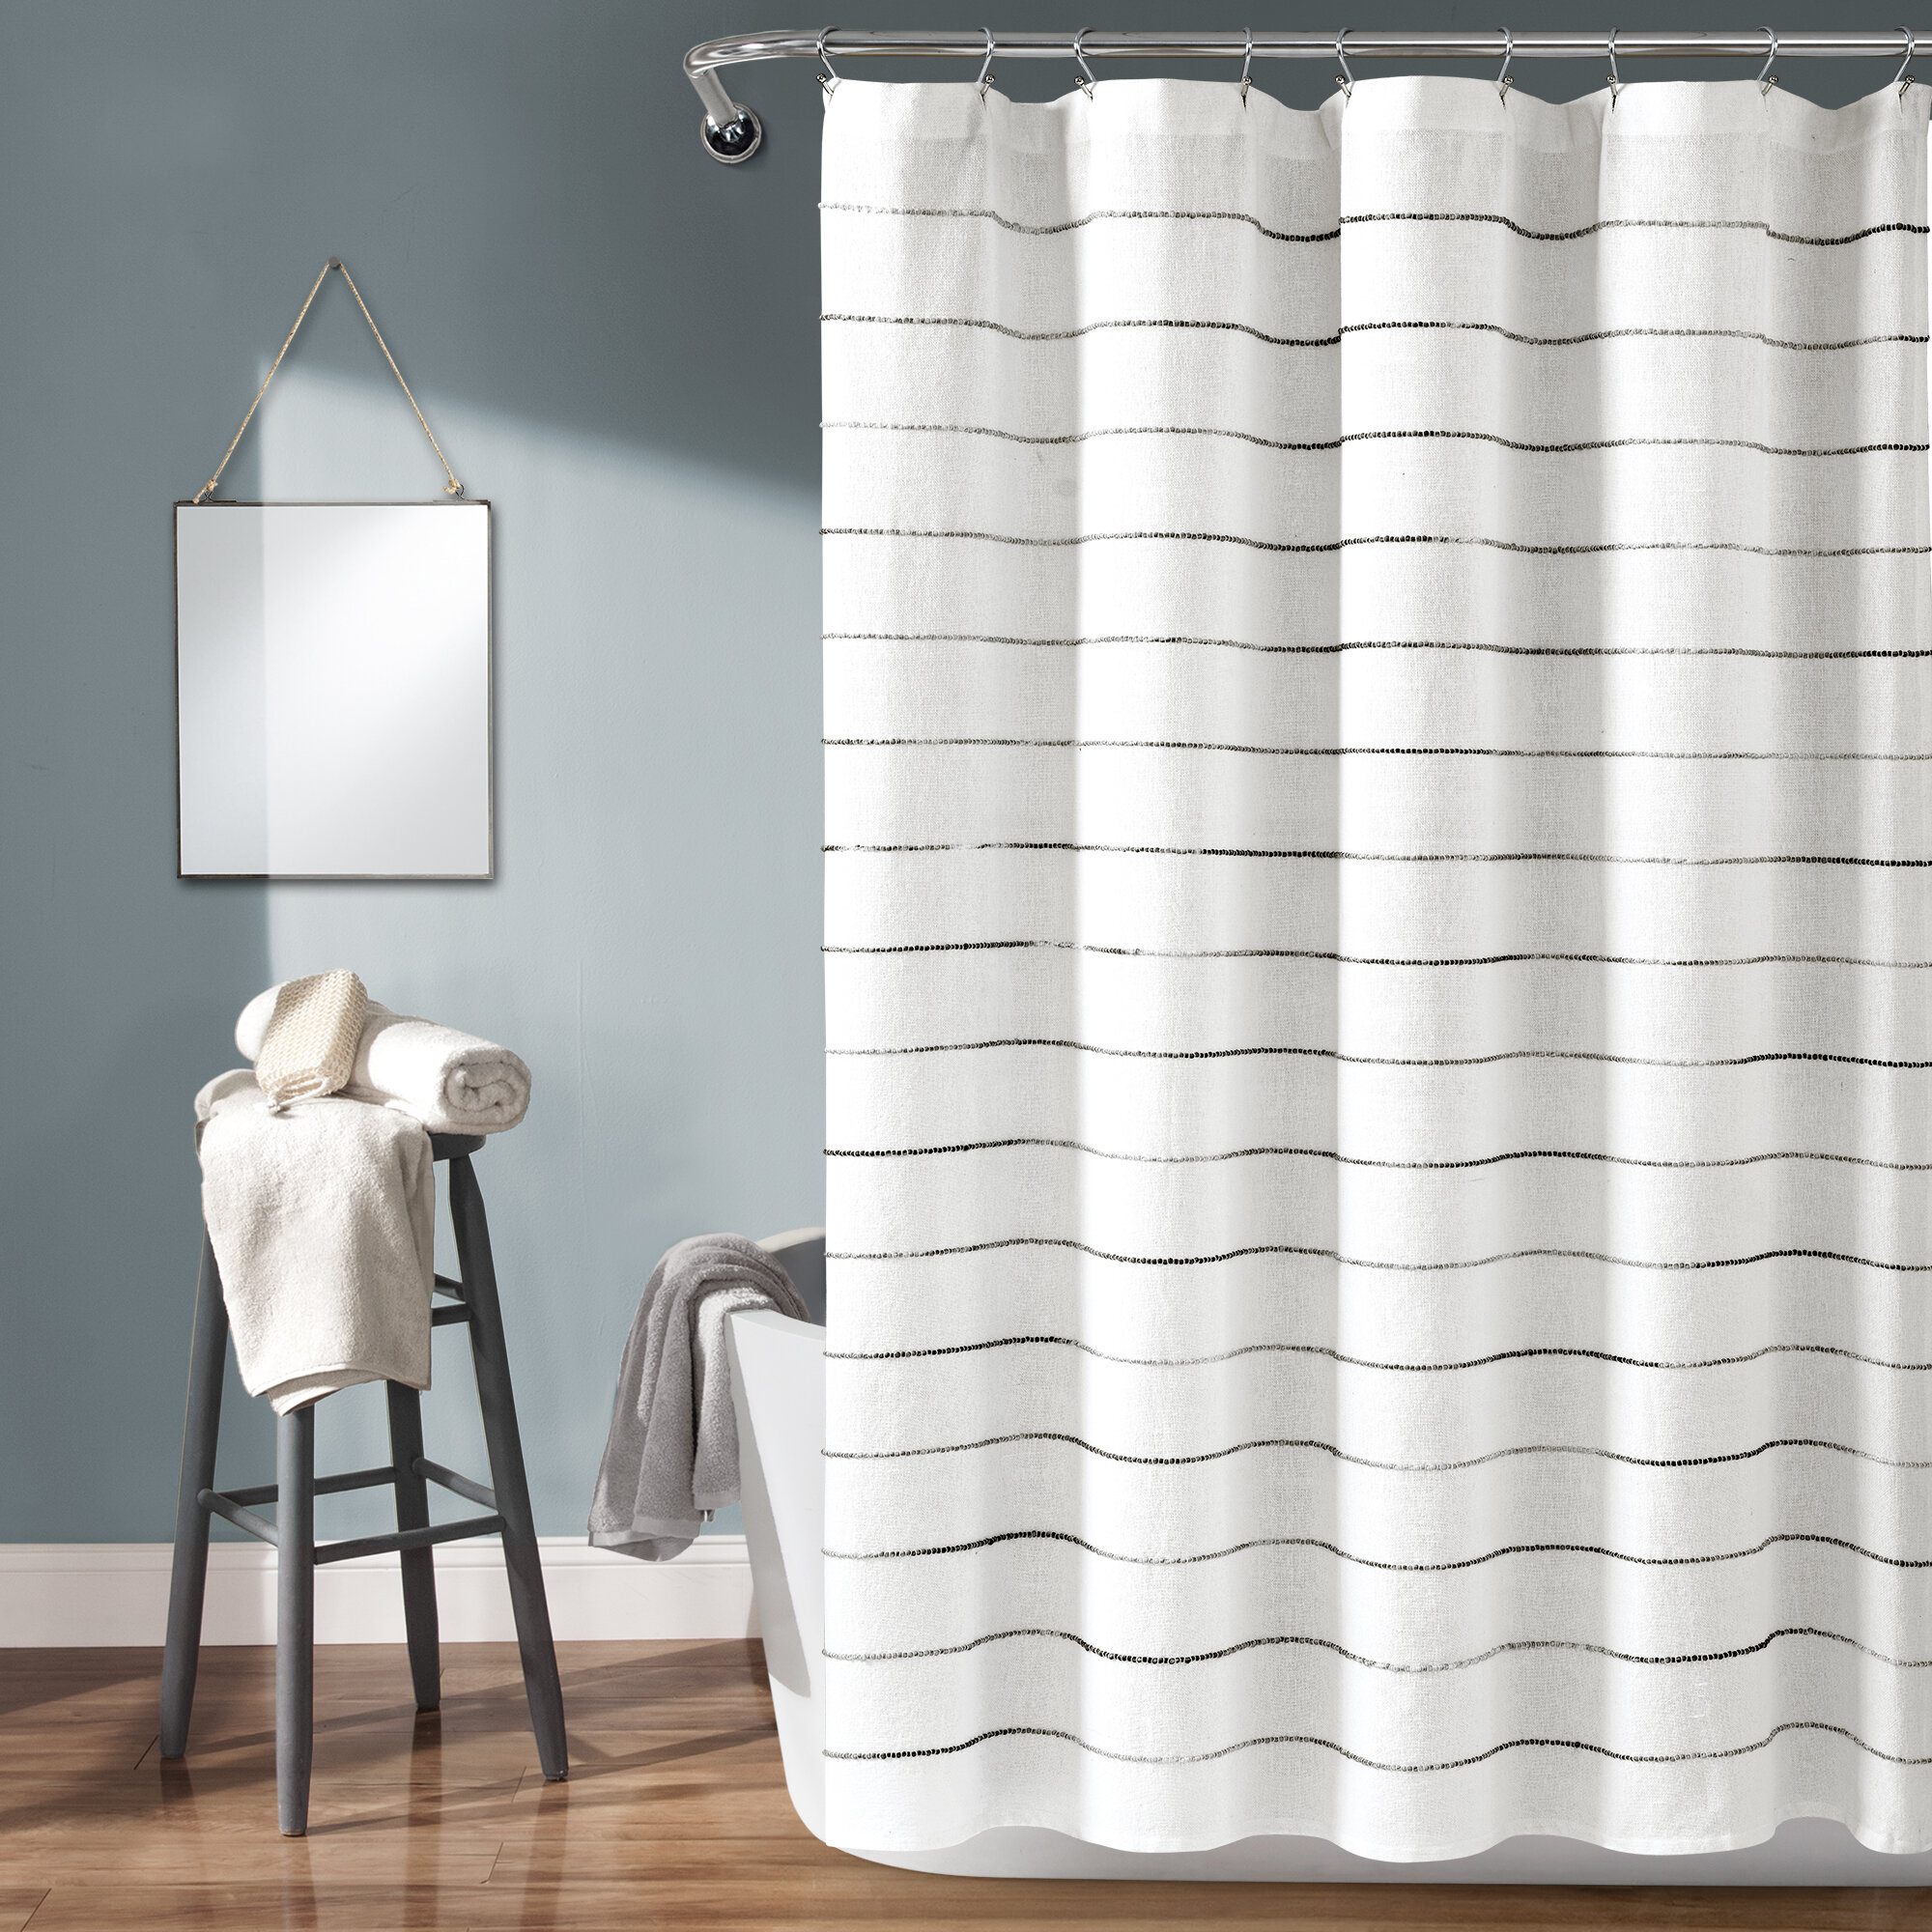 Premium Fabric Shower Curtain/Liner 70"x72" Dobby Pinstripes Polyester 